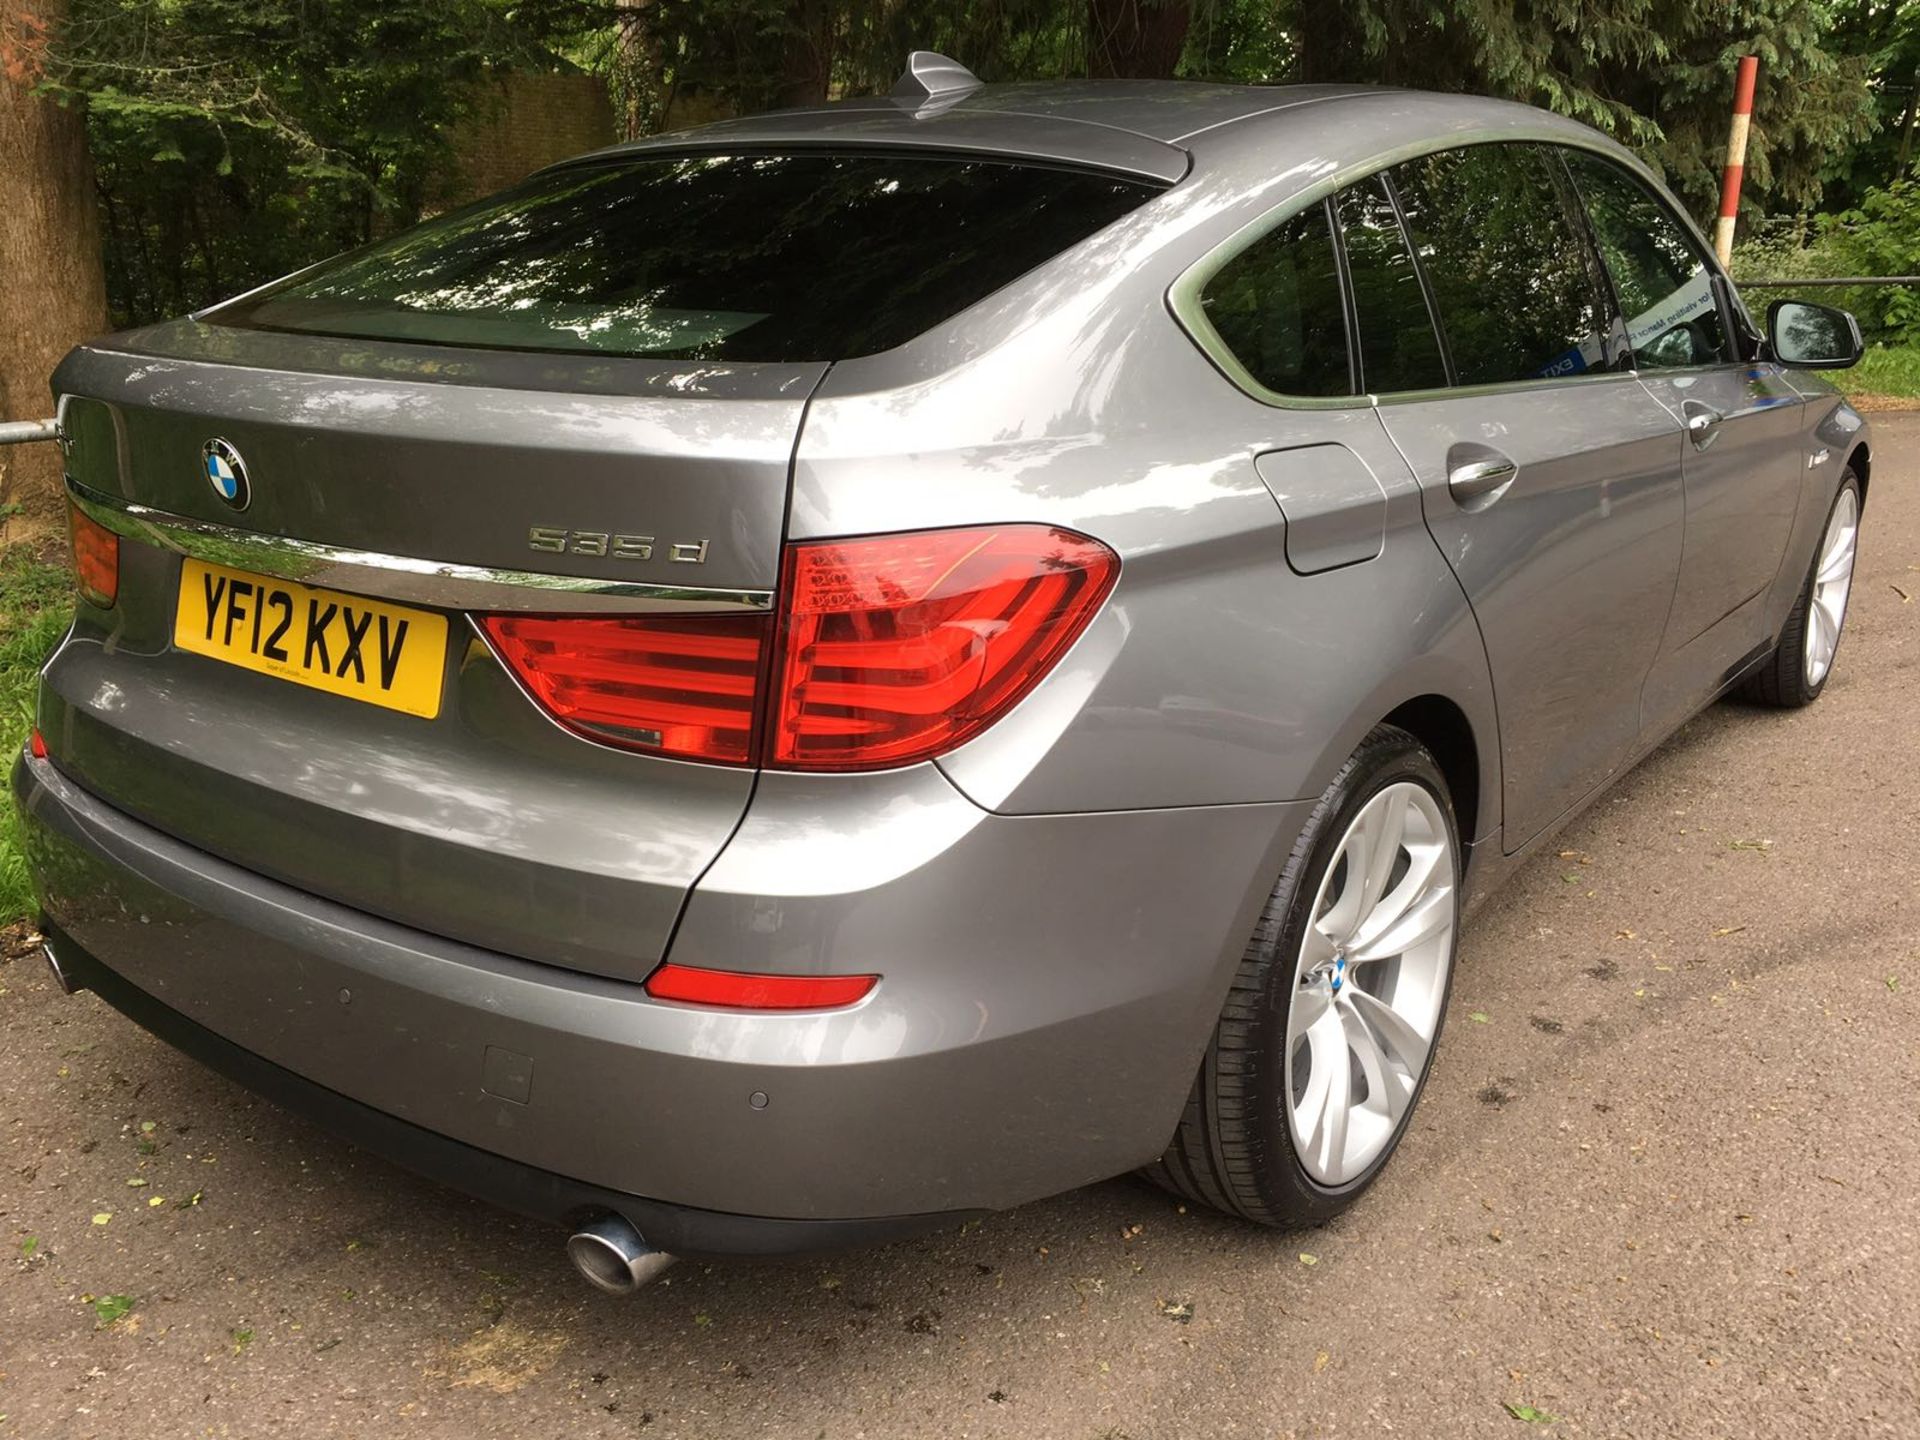 BMW 535D GT Gran Turismo 2012/12. 57,000 Miles. Automatic Gearbox - Image 11 of 19